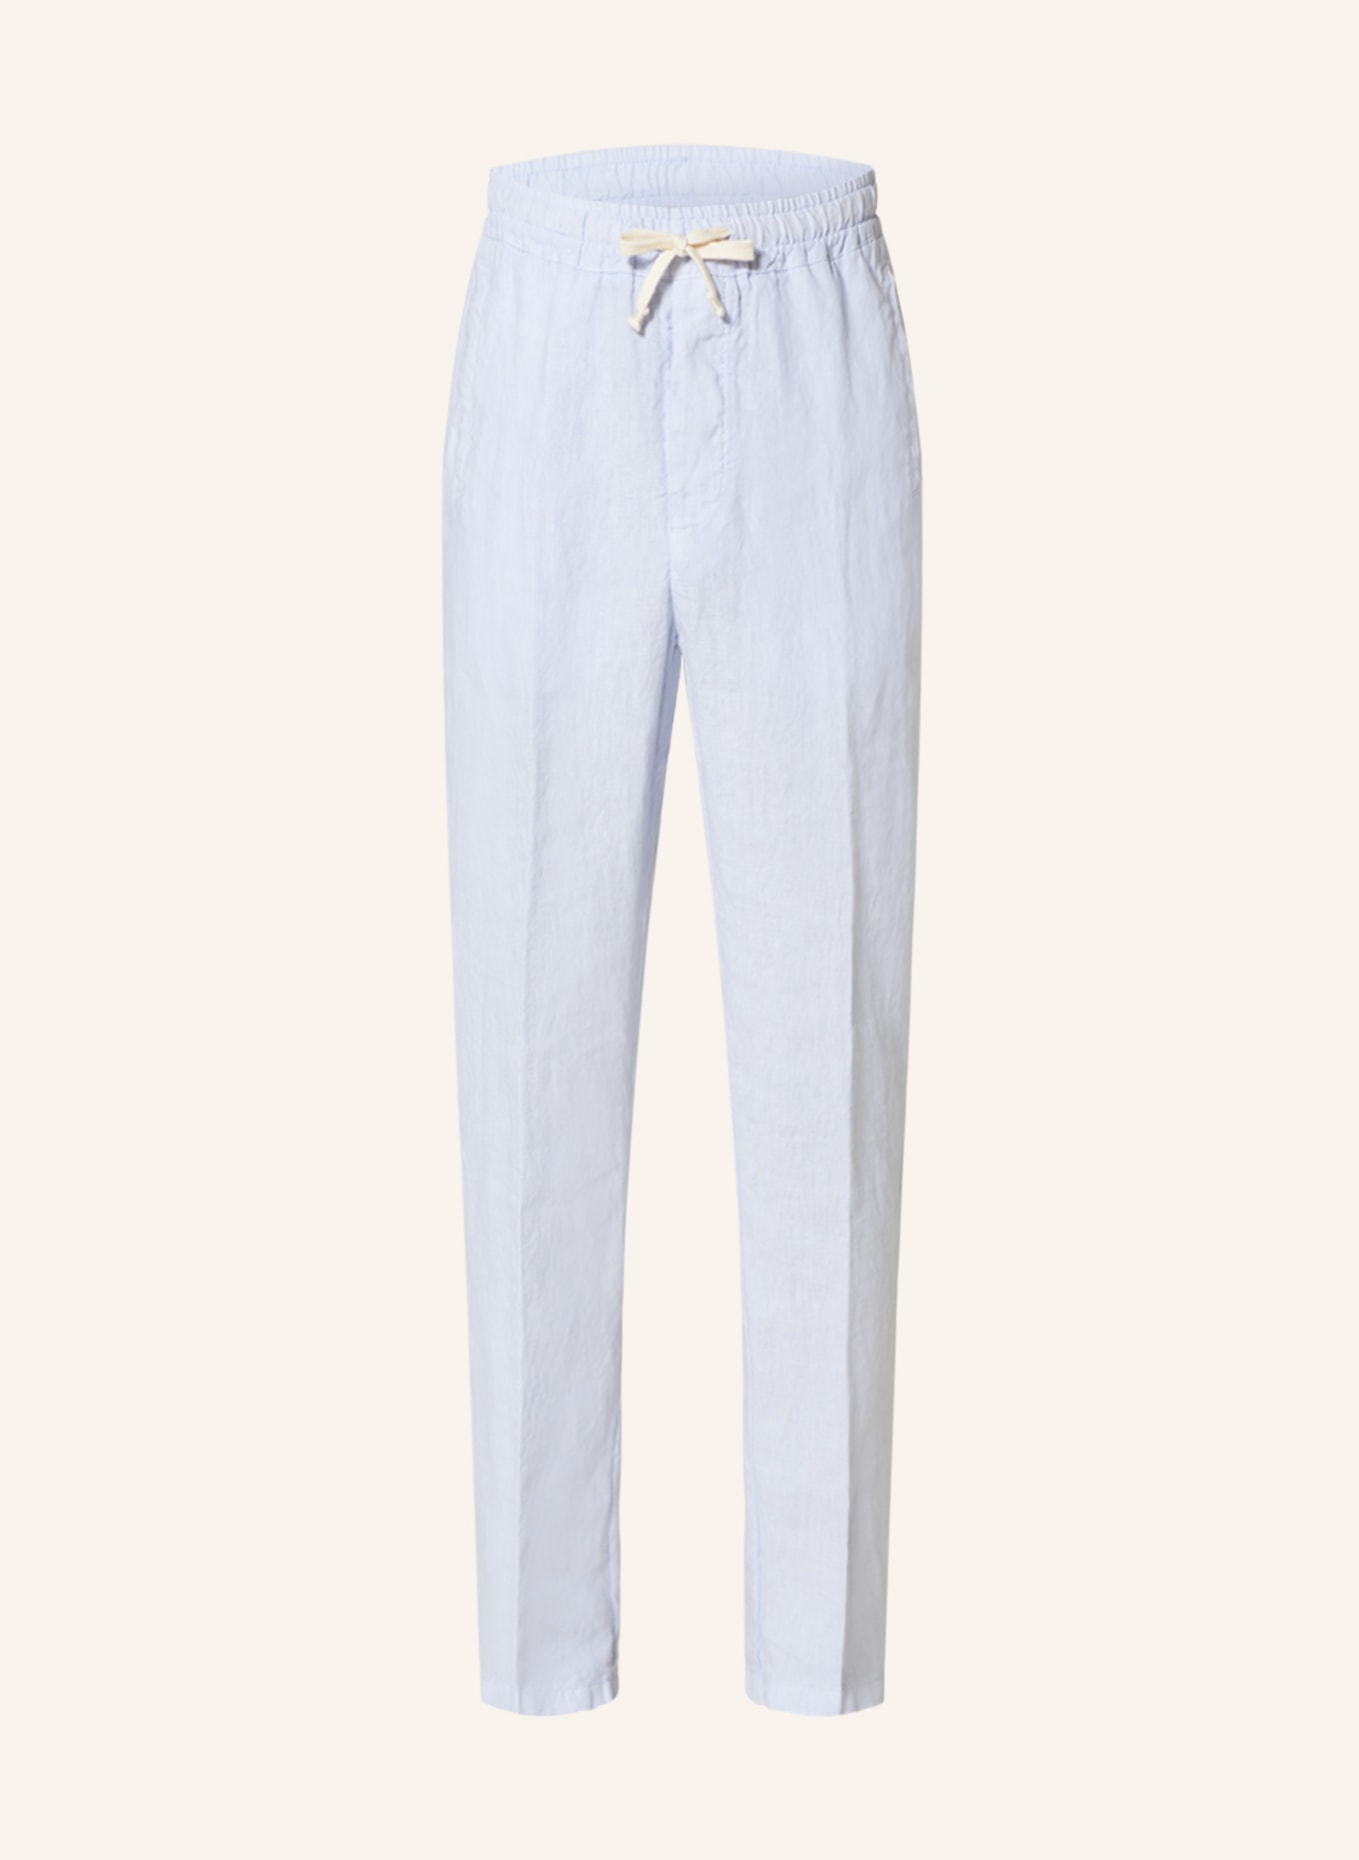 REISS Lennox Trouser High Waisted Cropped Trousers US8 285  eBay